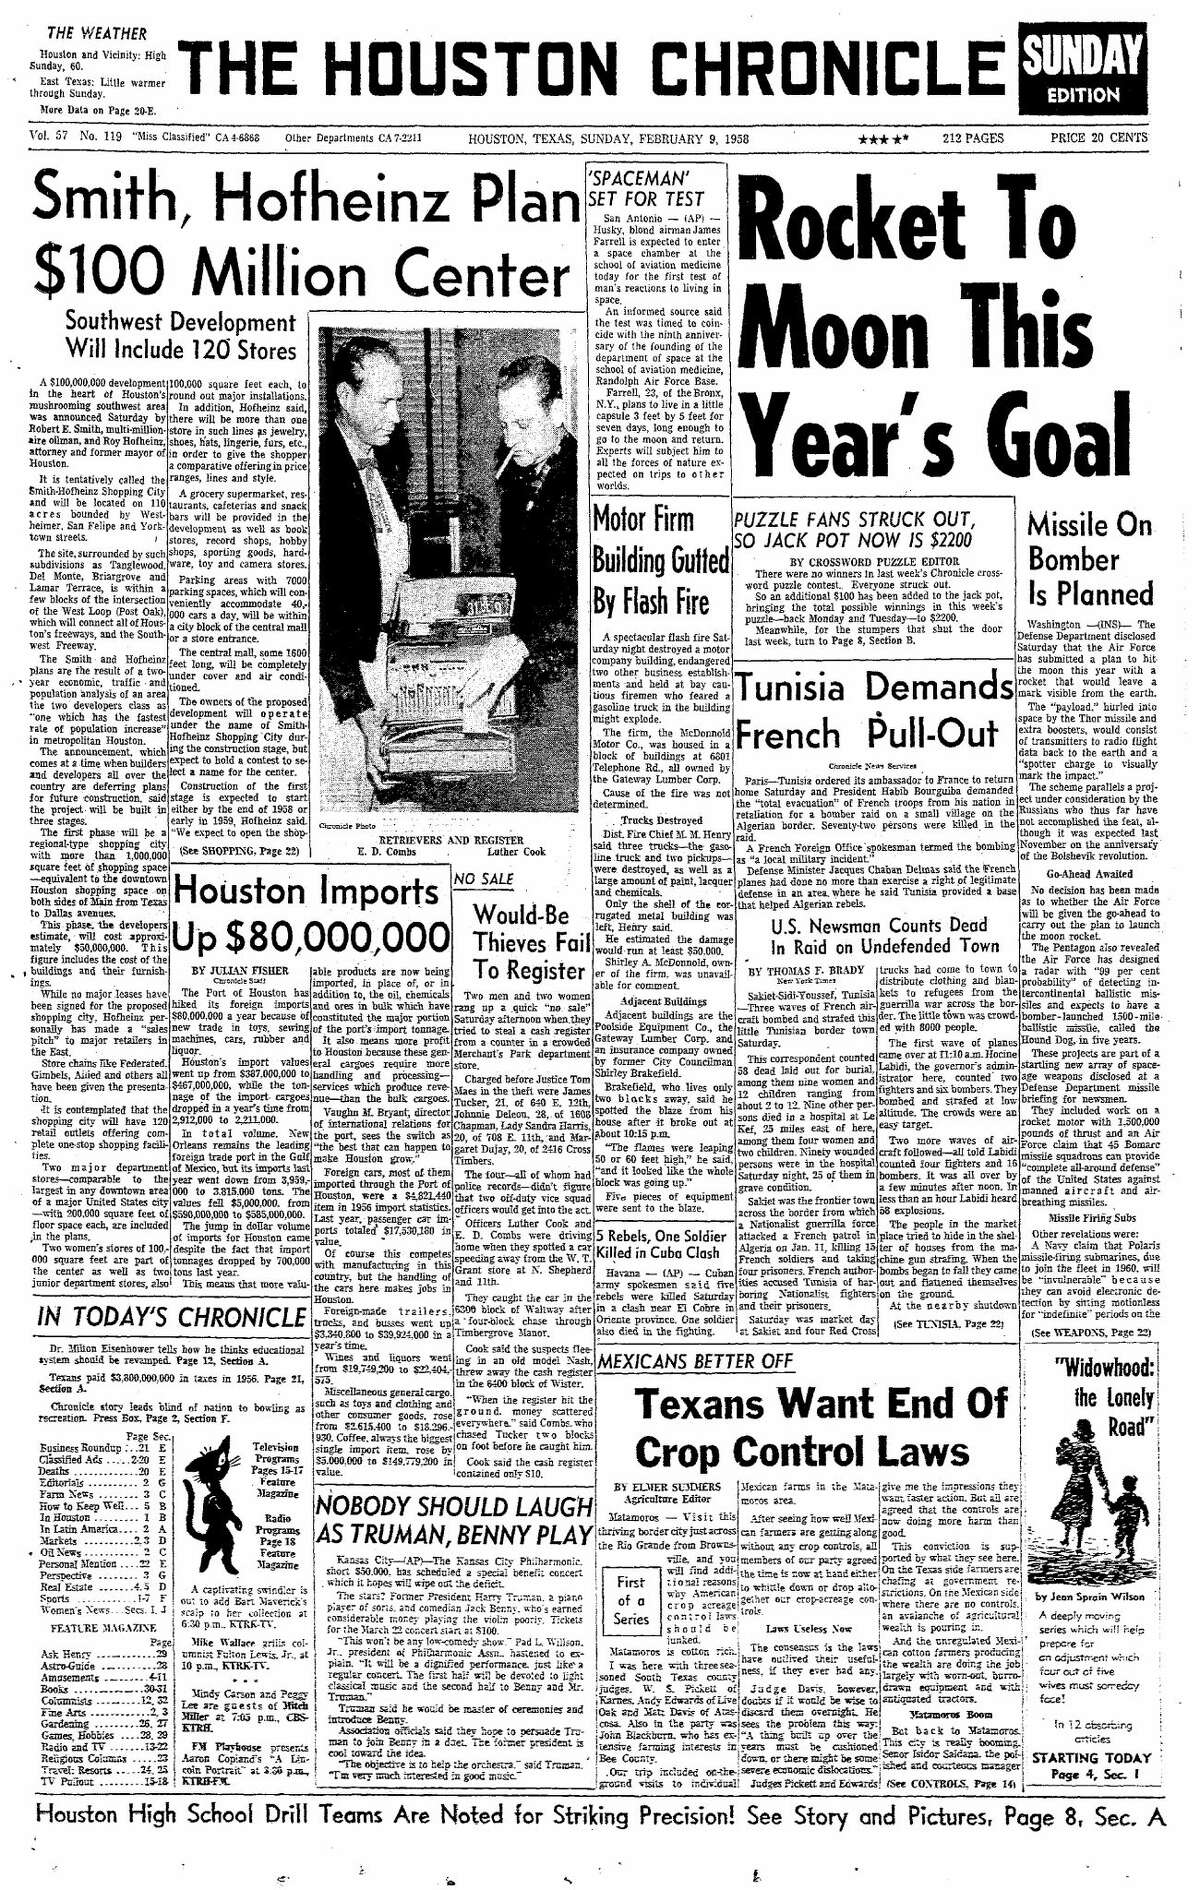 Houston Chronicle Page One Feb. 9, 1958